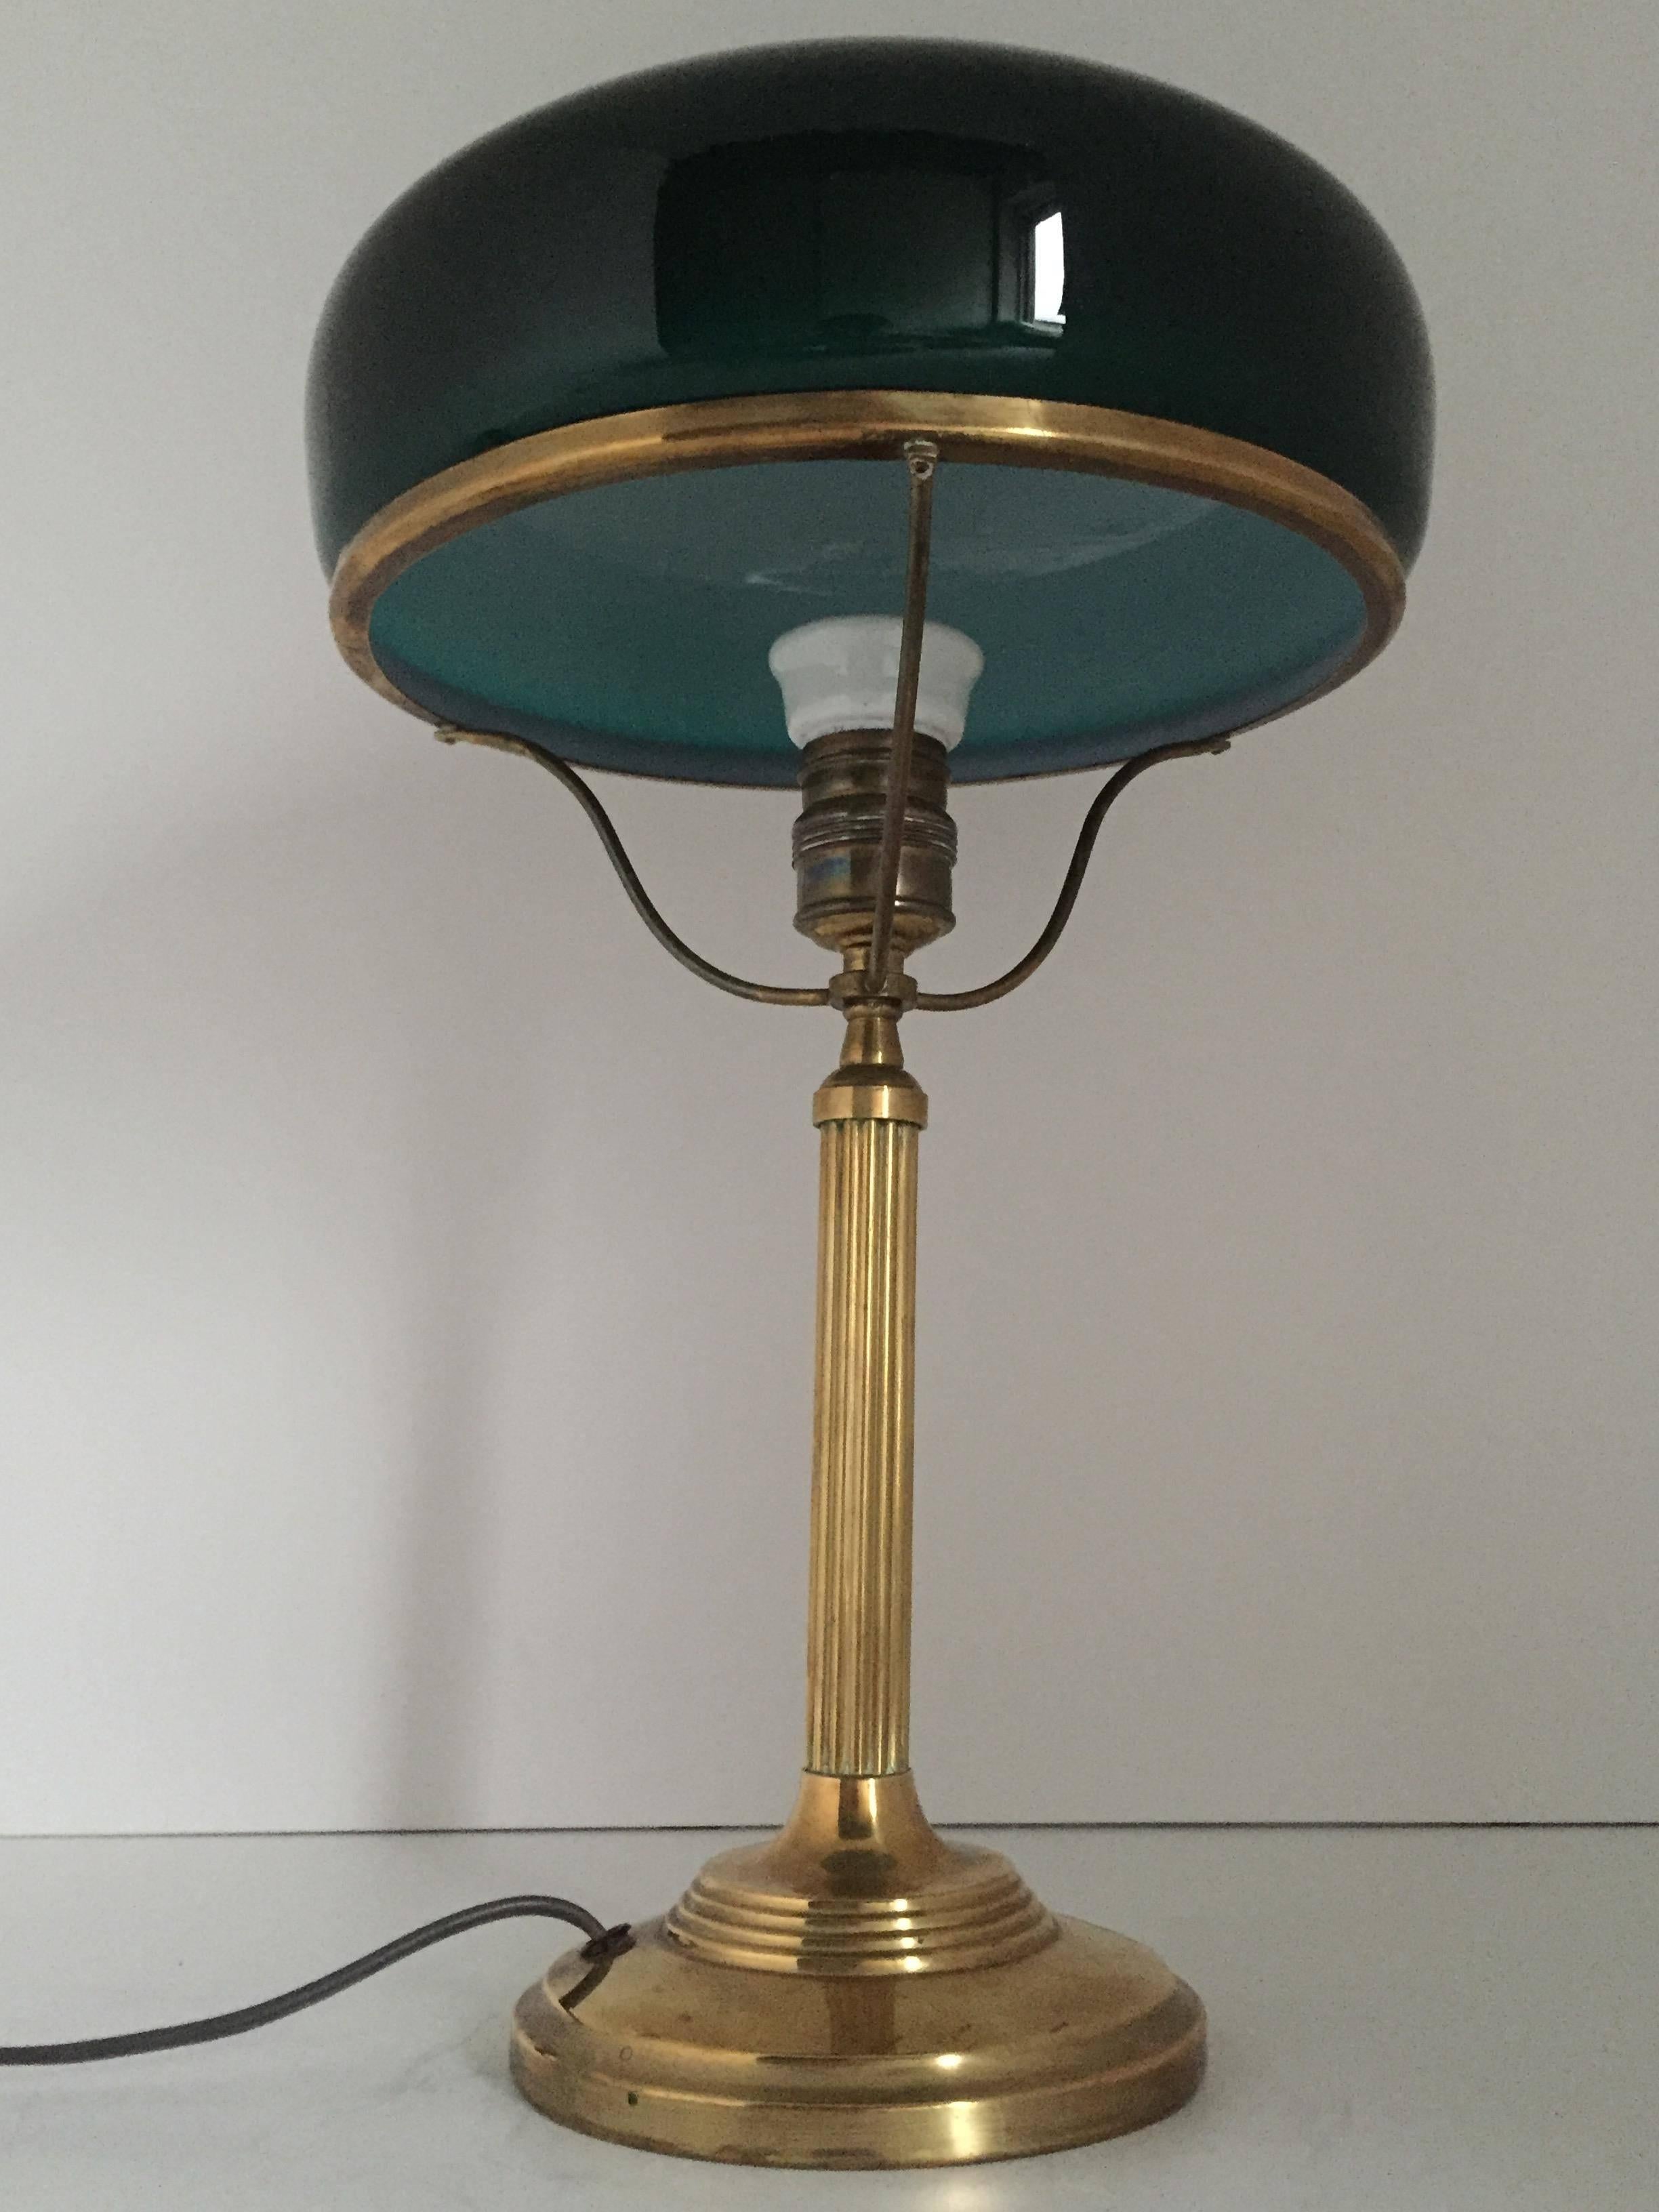 A Swedish 1925 brass table lamp with a dark green glass shade. The old cords has been exchanged to new, but the old switch work very nicely still. Measure: The height is 40cm and the diameter of the shade is 24cm.